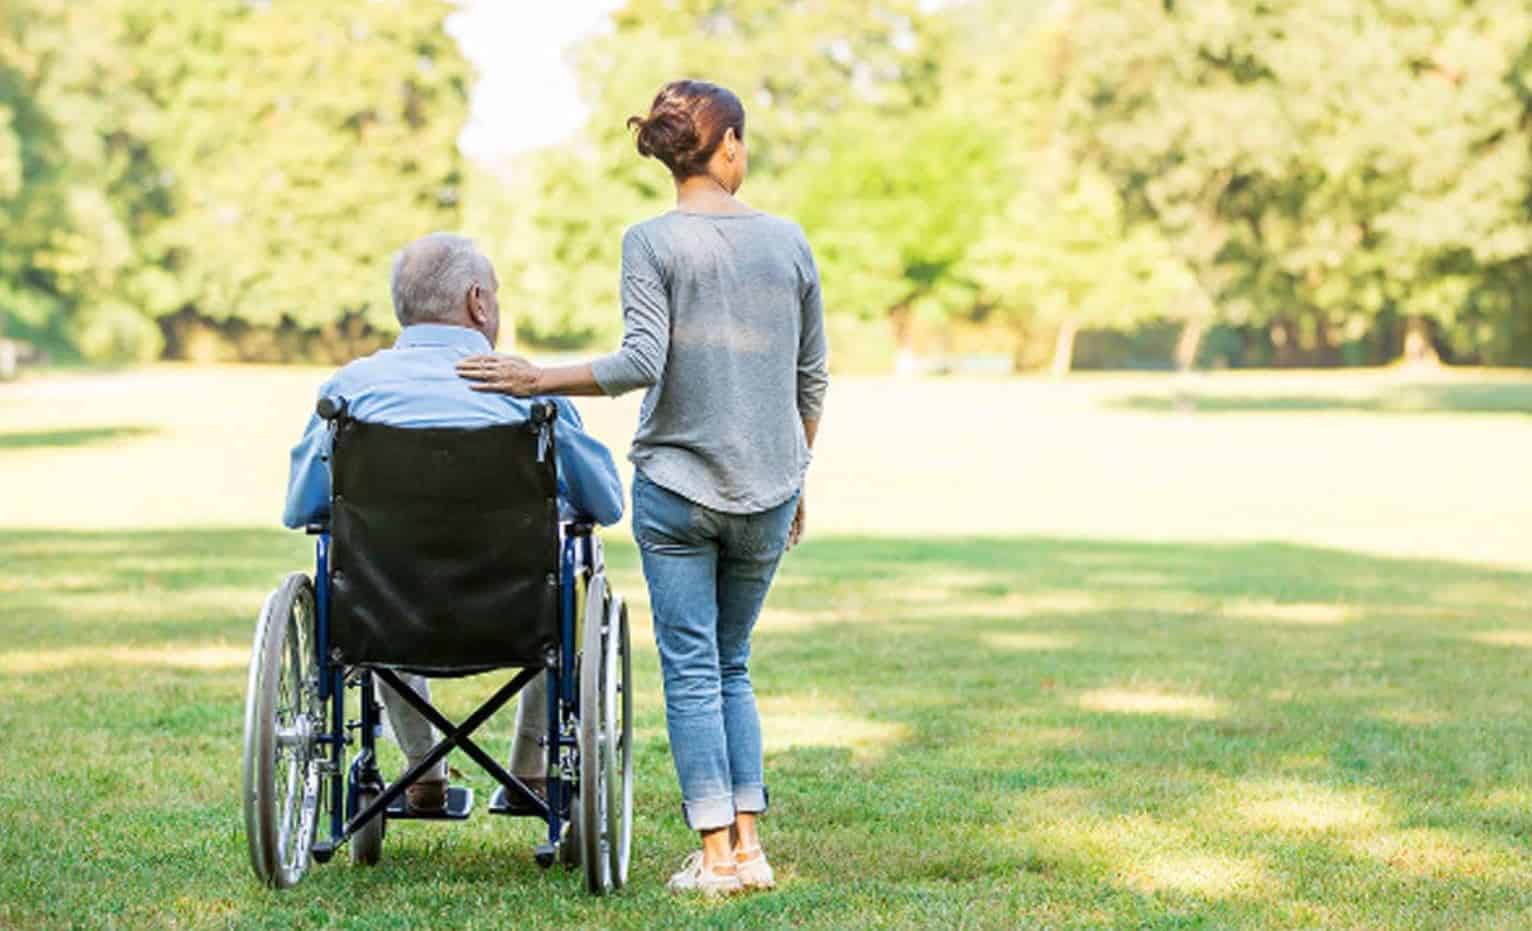 A woman standing next to an elderly man who is sitting in a wheelchair.